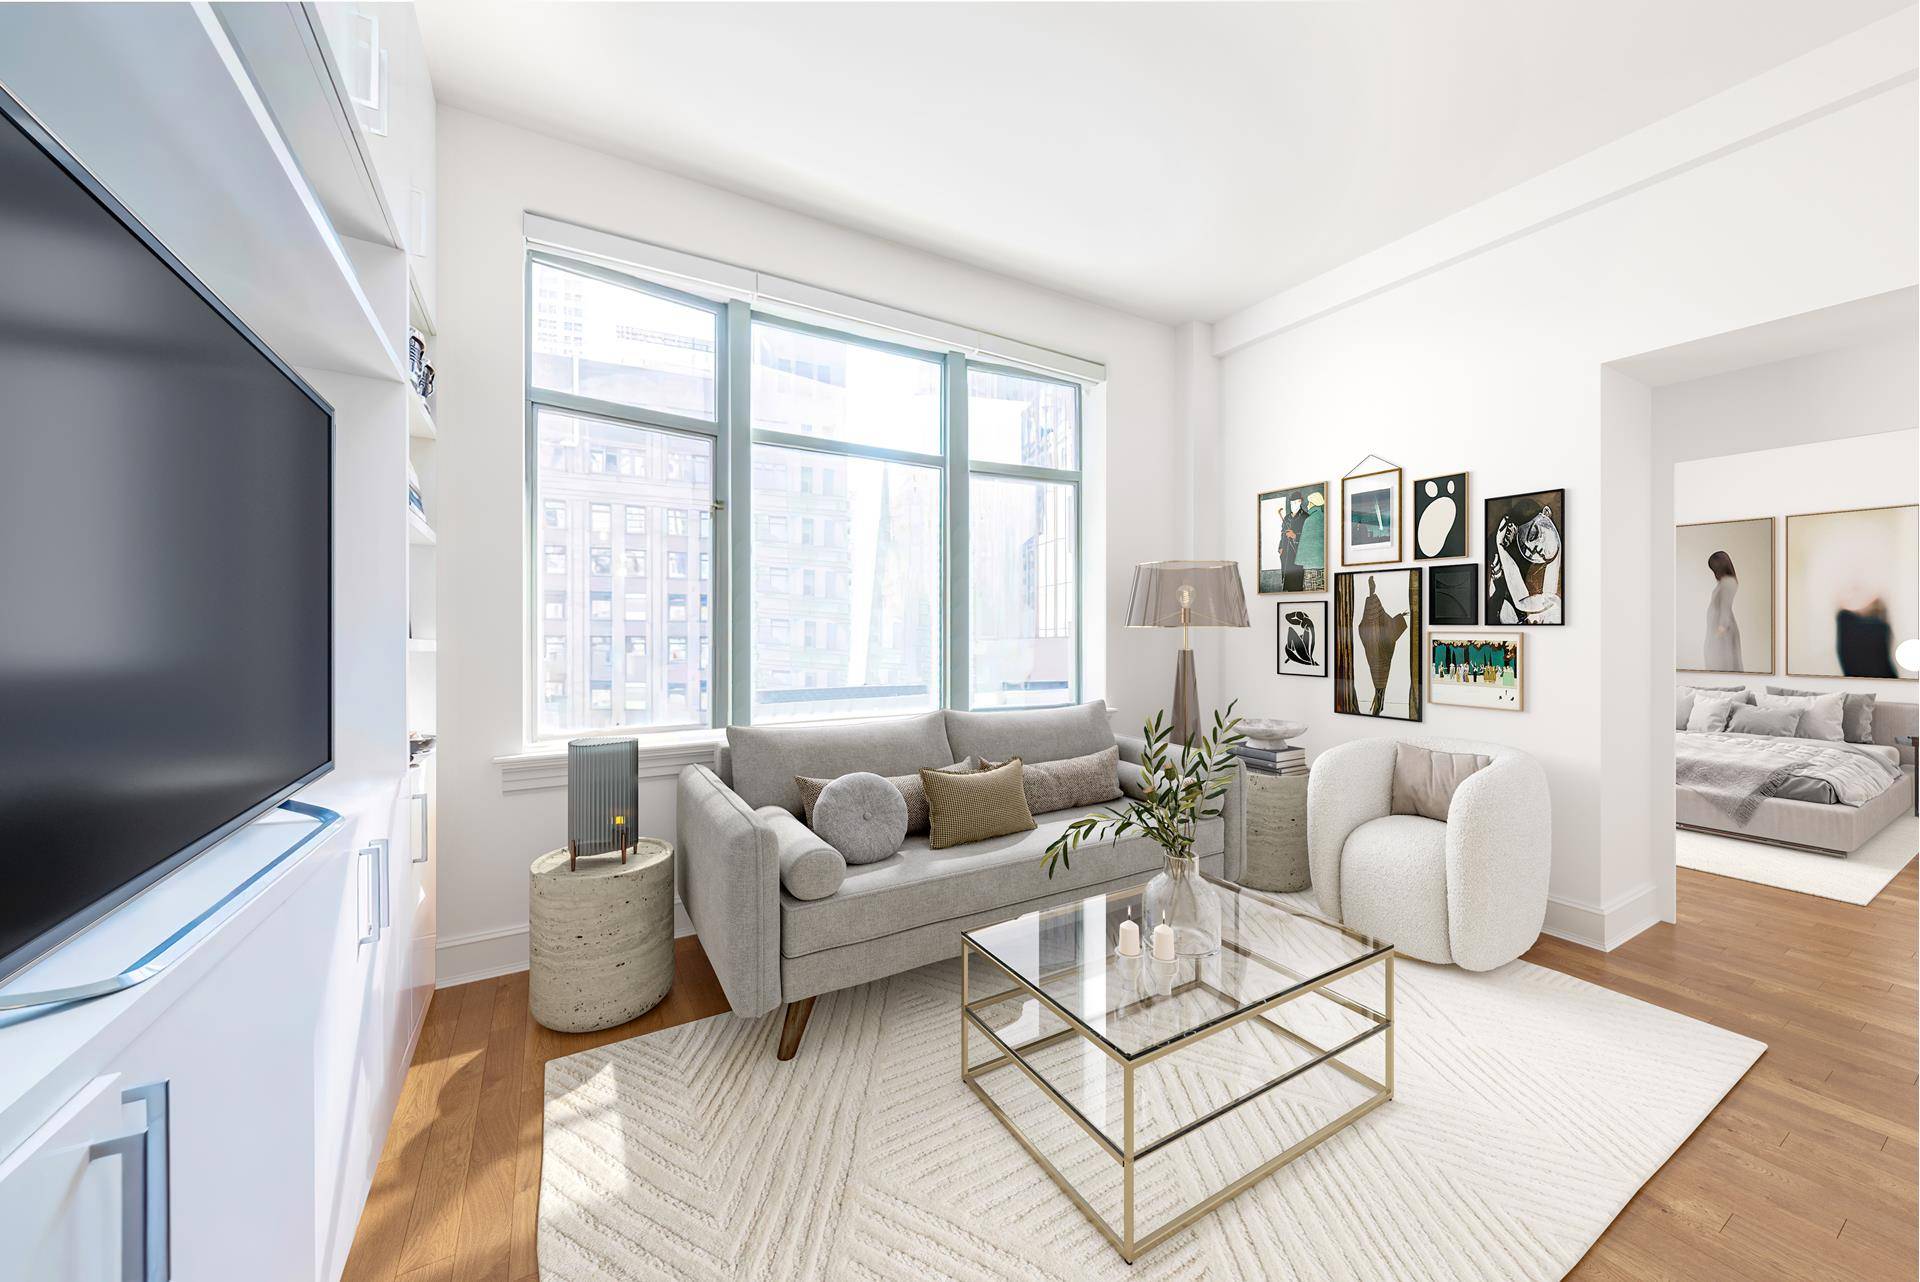 This triple mint loft like one bedroom has soaring 11 ft ceilings, double paned oversized walls windows facing East, central heat and air conditioning, and pine hardwood floors throughout.